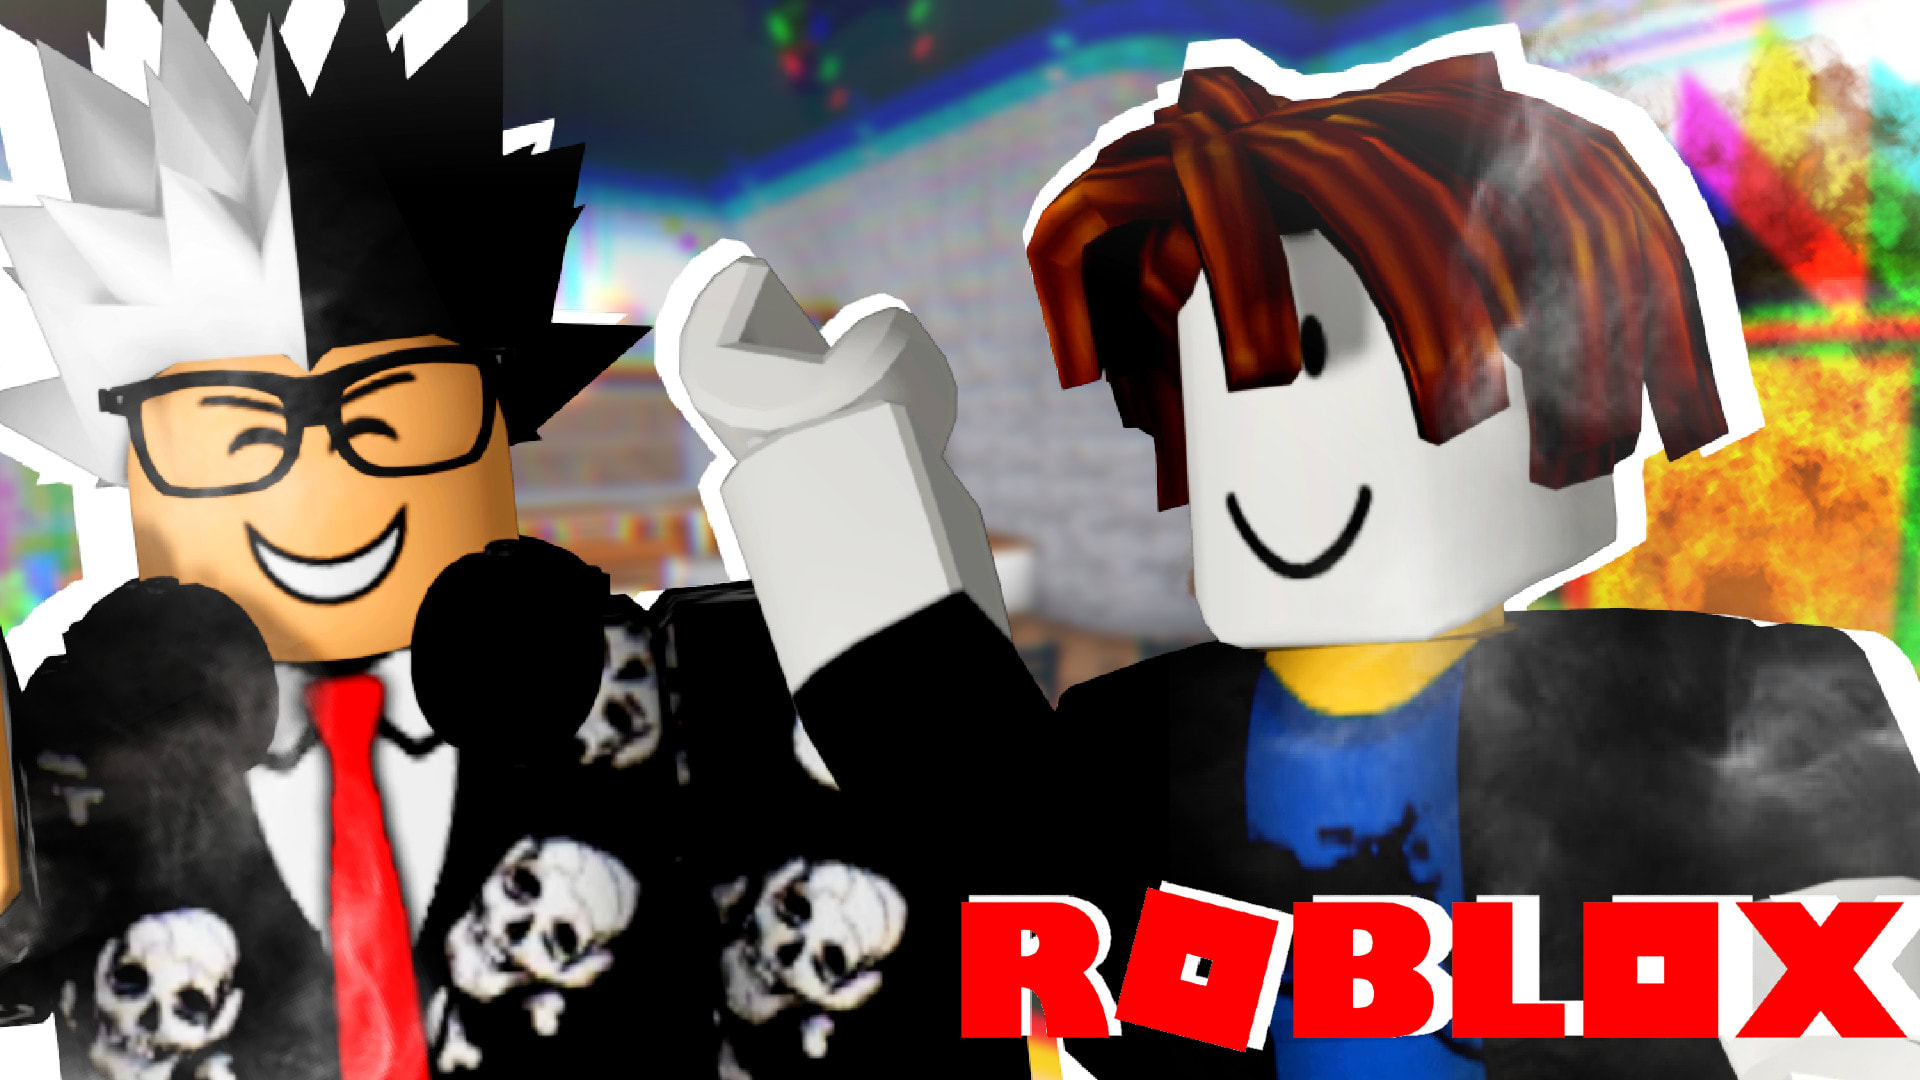 Make You A Hq Roblox Gfx For Your Youtube Channel Game Etc By Thetwinsgame1 - youtube roblox hq